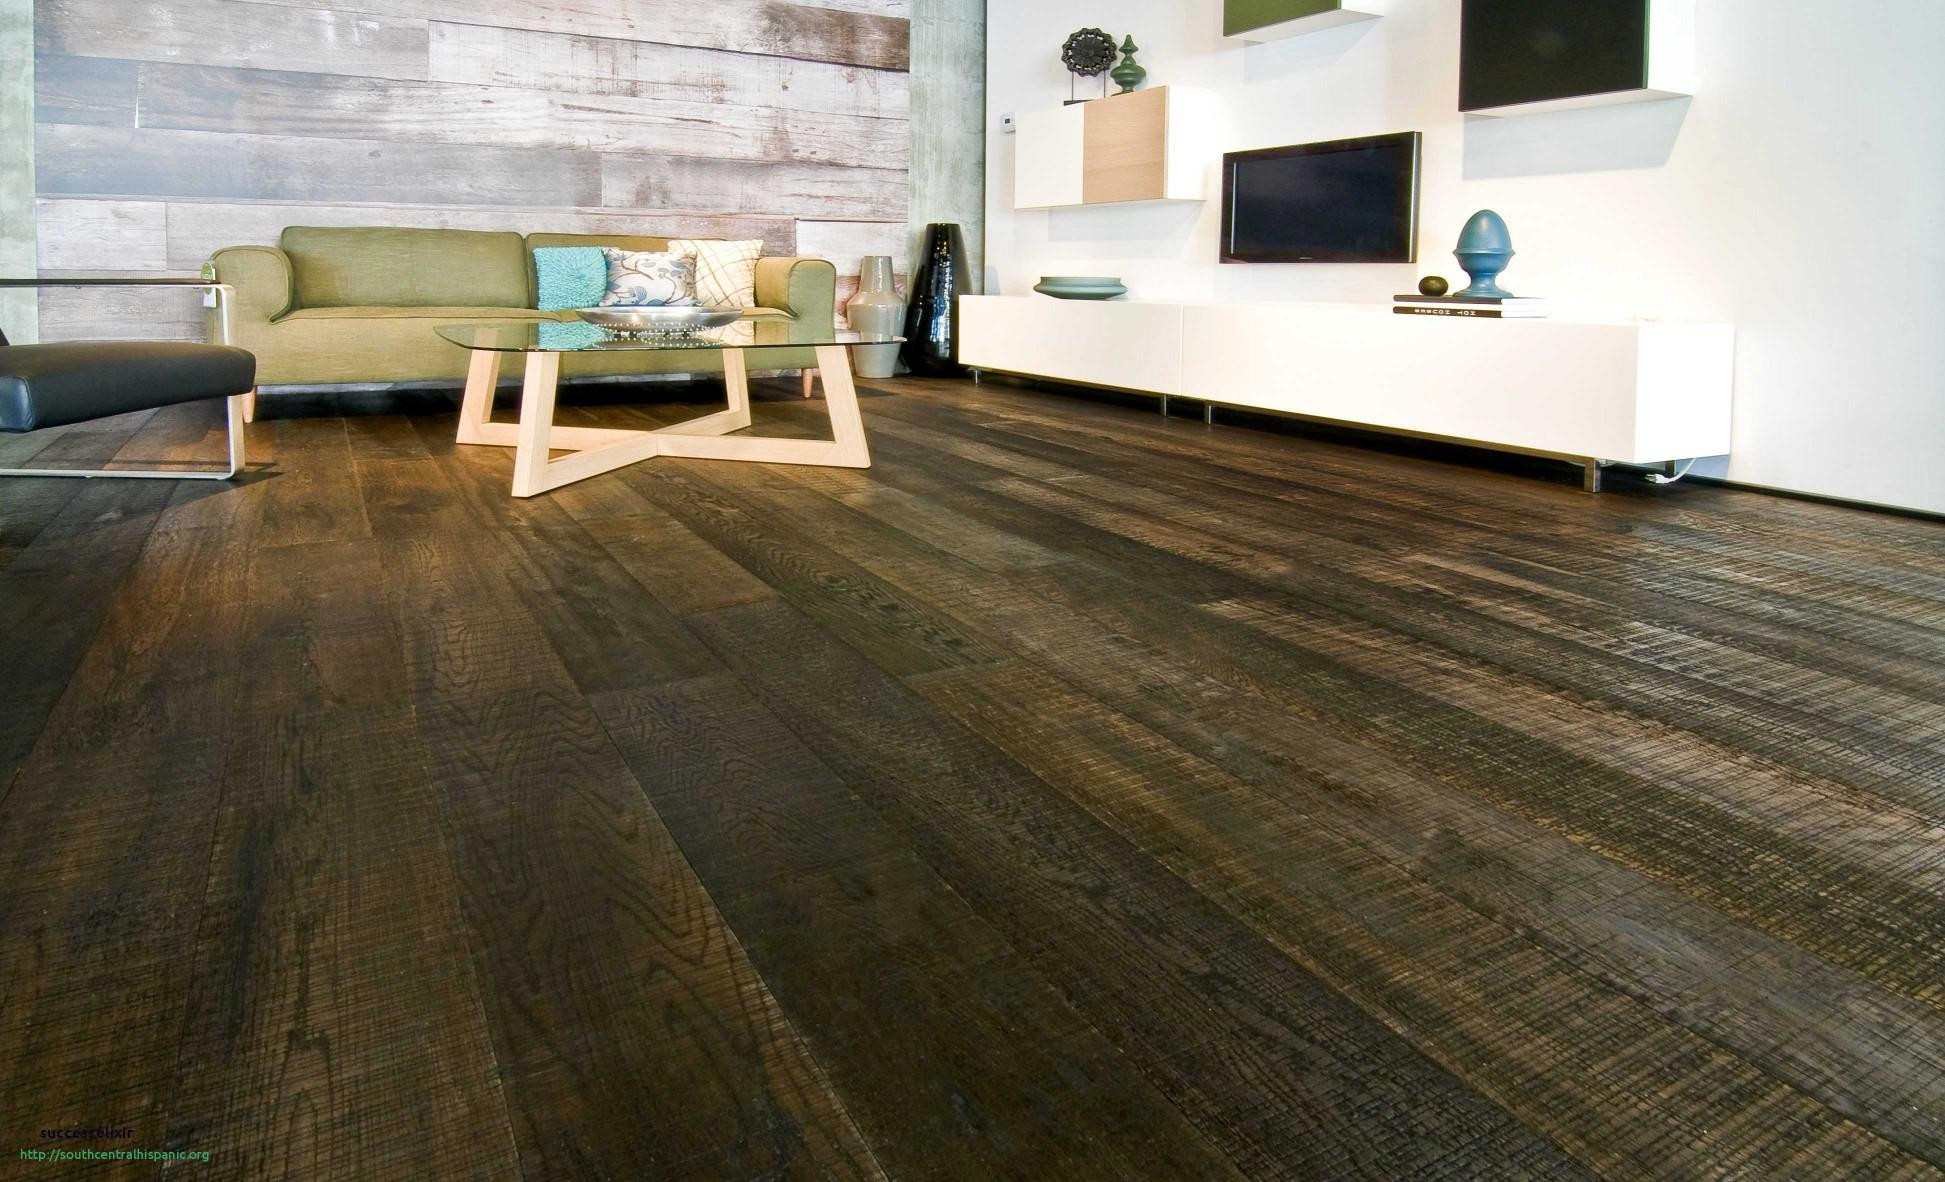 mirage hardwood flooring canada of new different styles hardwood flooring concept for best place to buy laminate flooring beau engaging discount hardwood flooring 5 where to buy inspirational